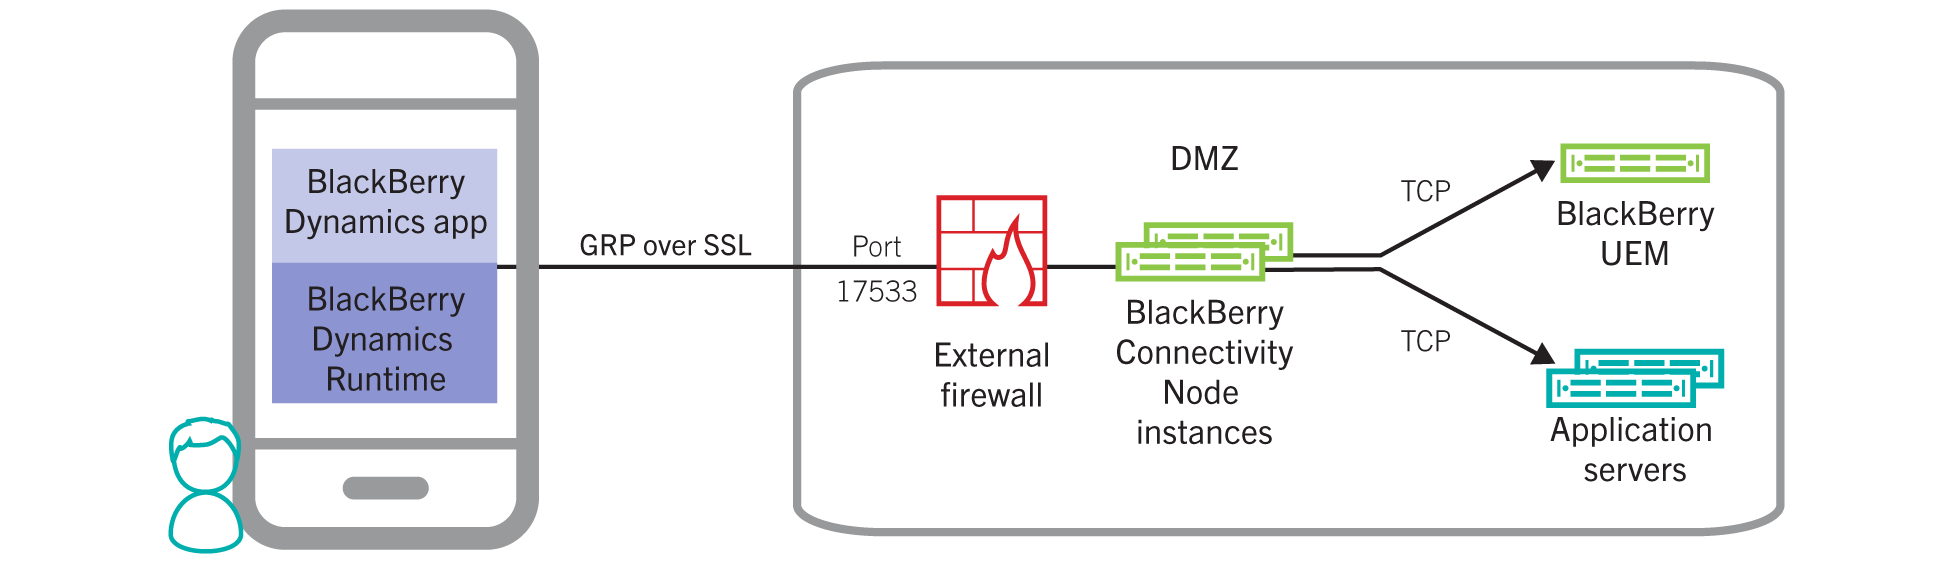 Direct Connect architecture